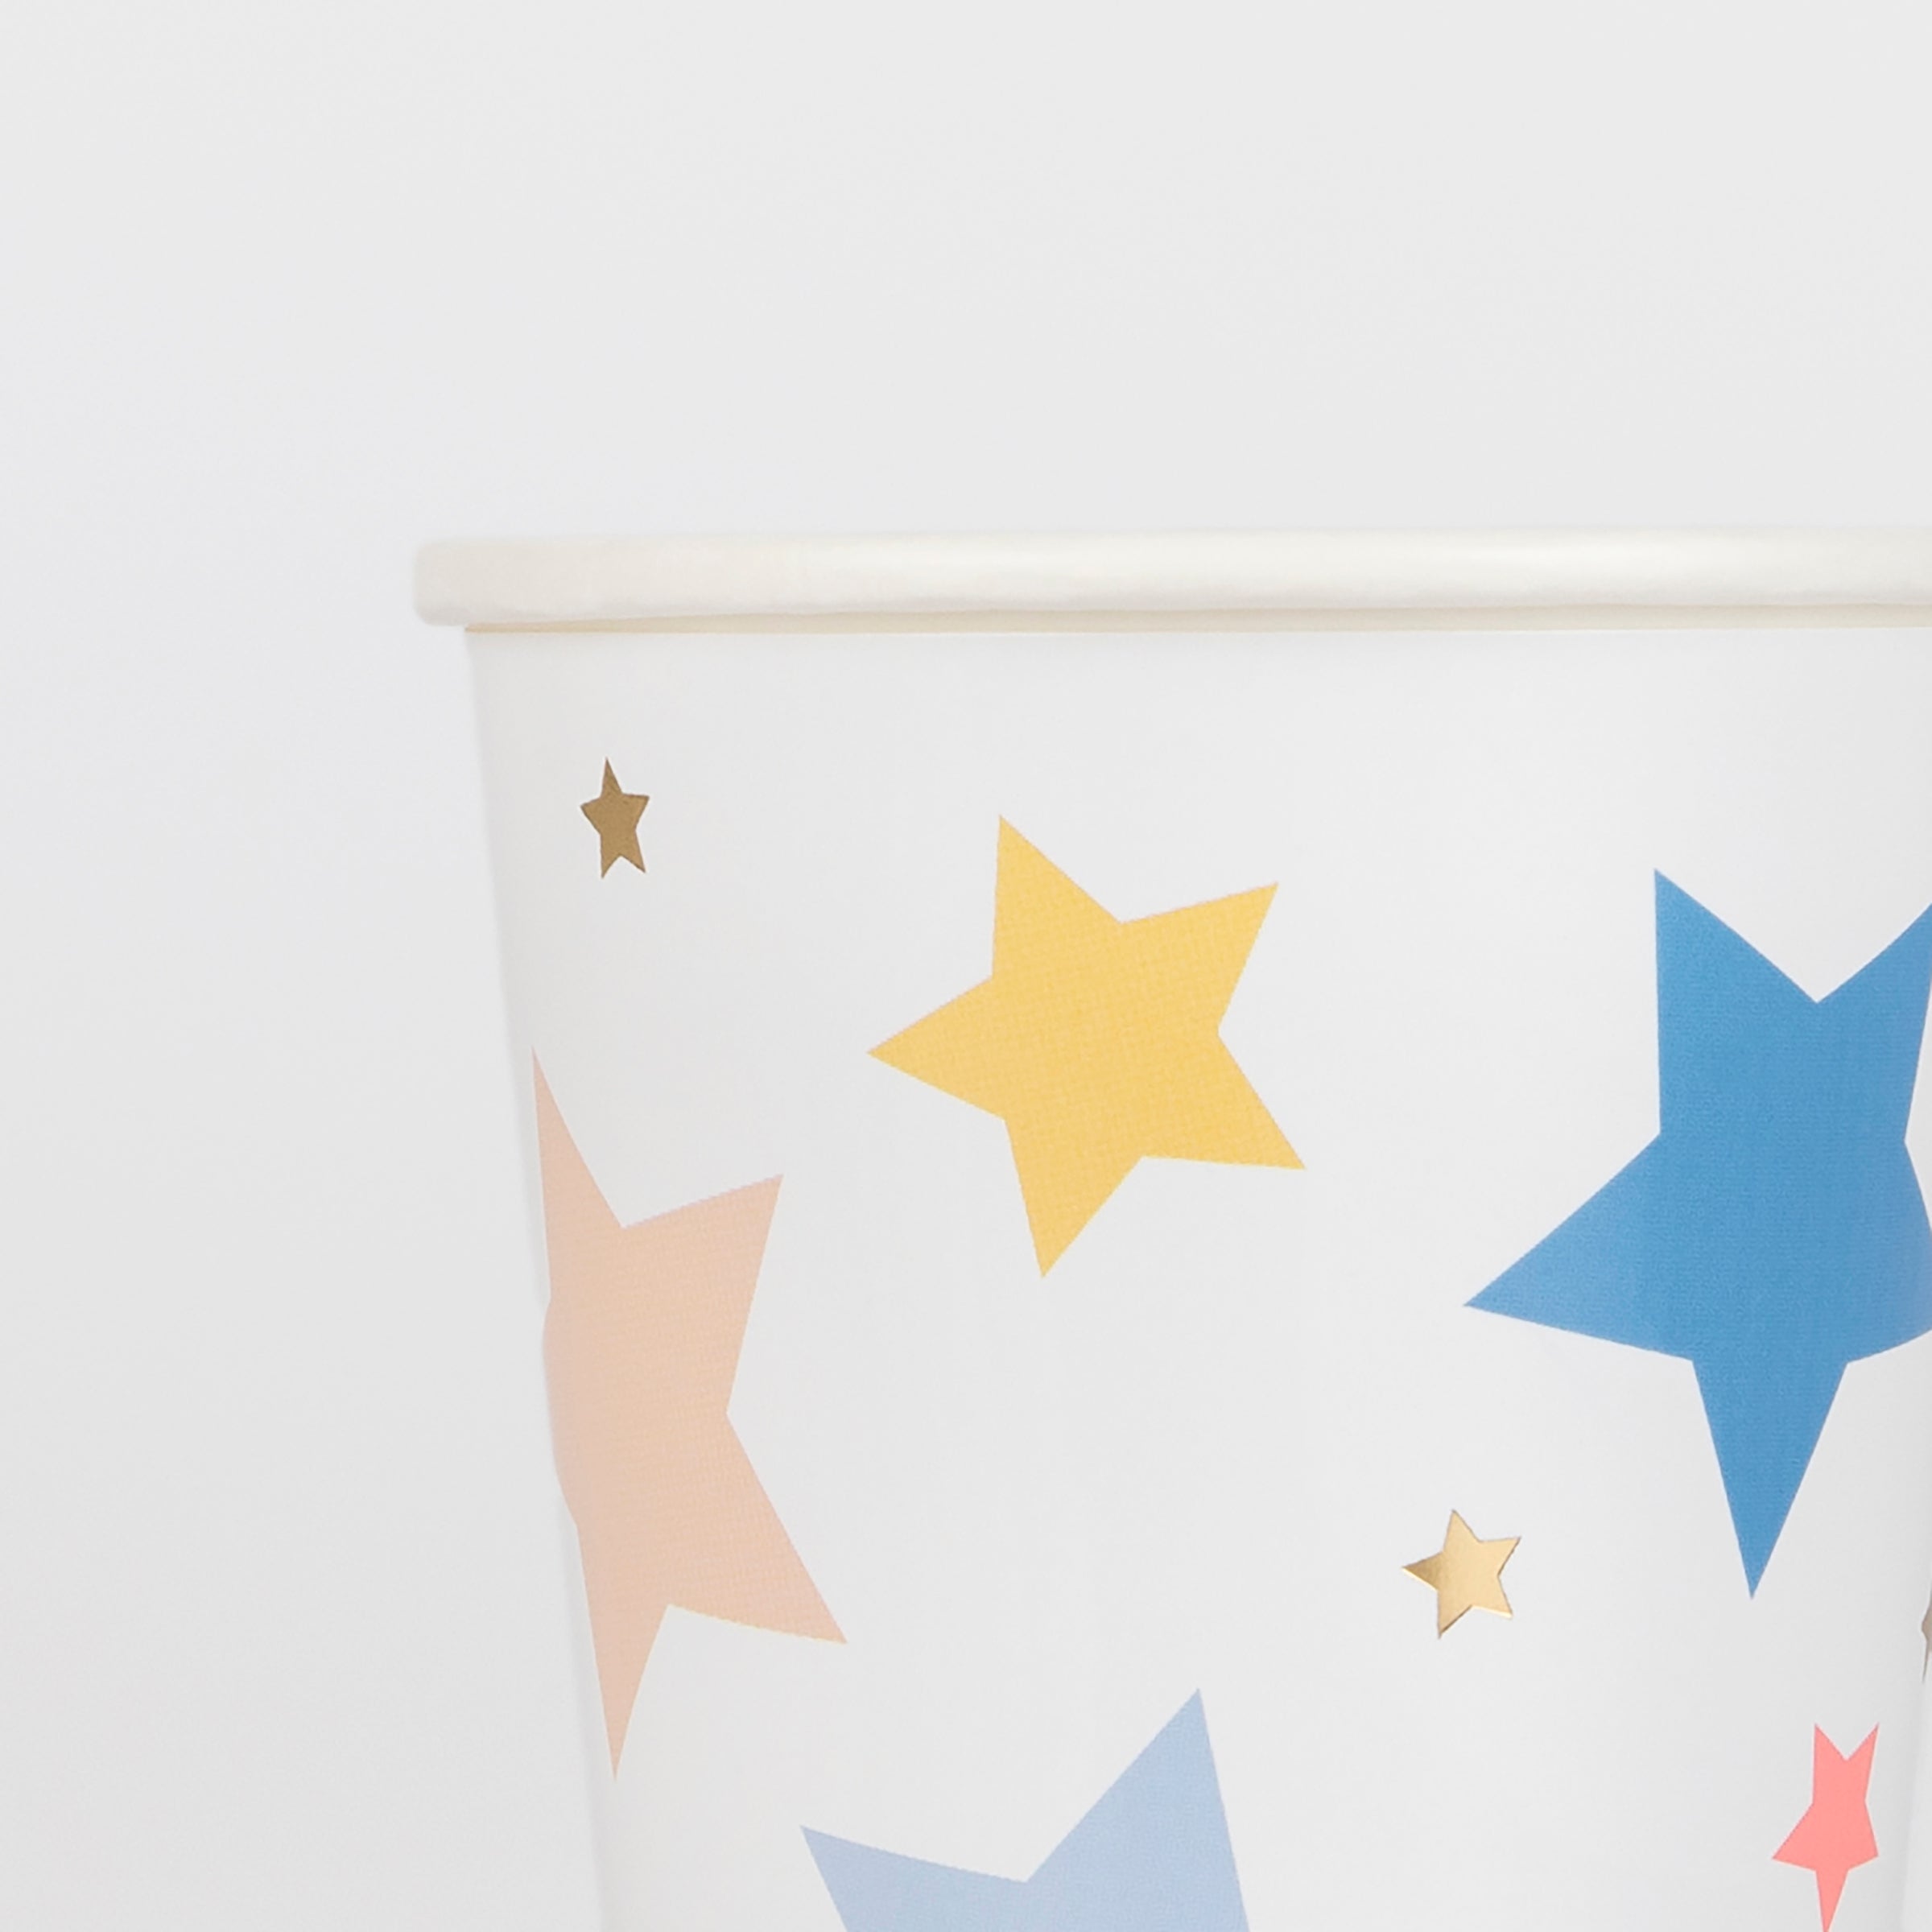 Our paper cups have colourful stars and shiny gold foil, ideal to add to your birthday party supplies.